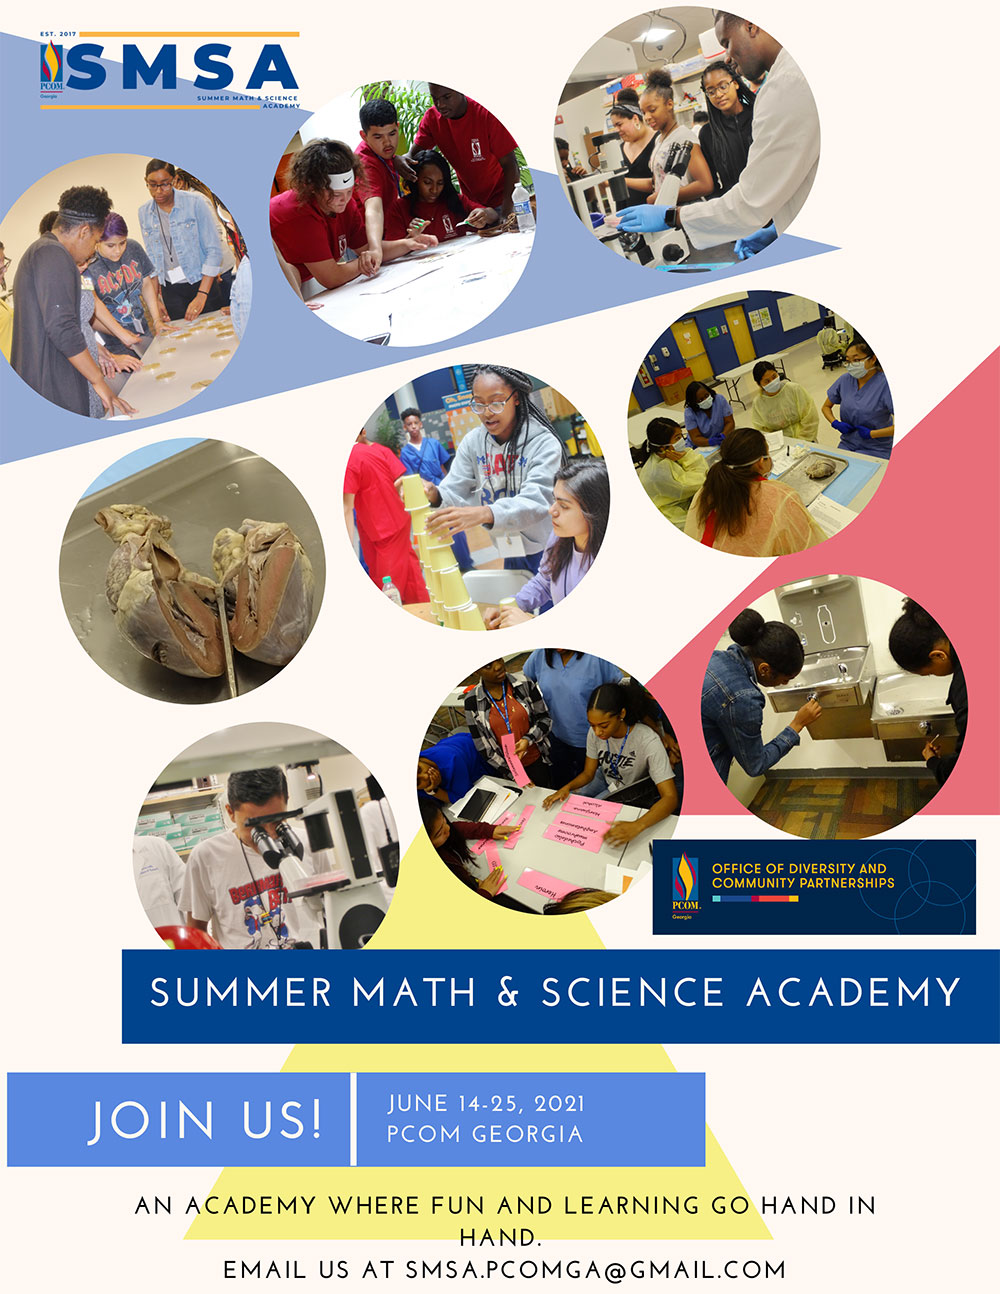 Promotional poster for the PCOM Georgia Summer Math and Science Academy, a summer STEAM program for Atlanta area high school students